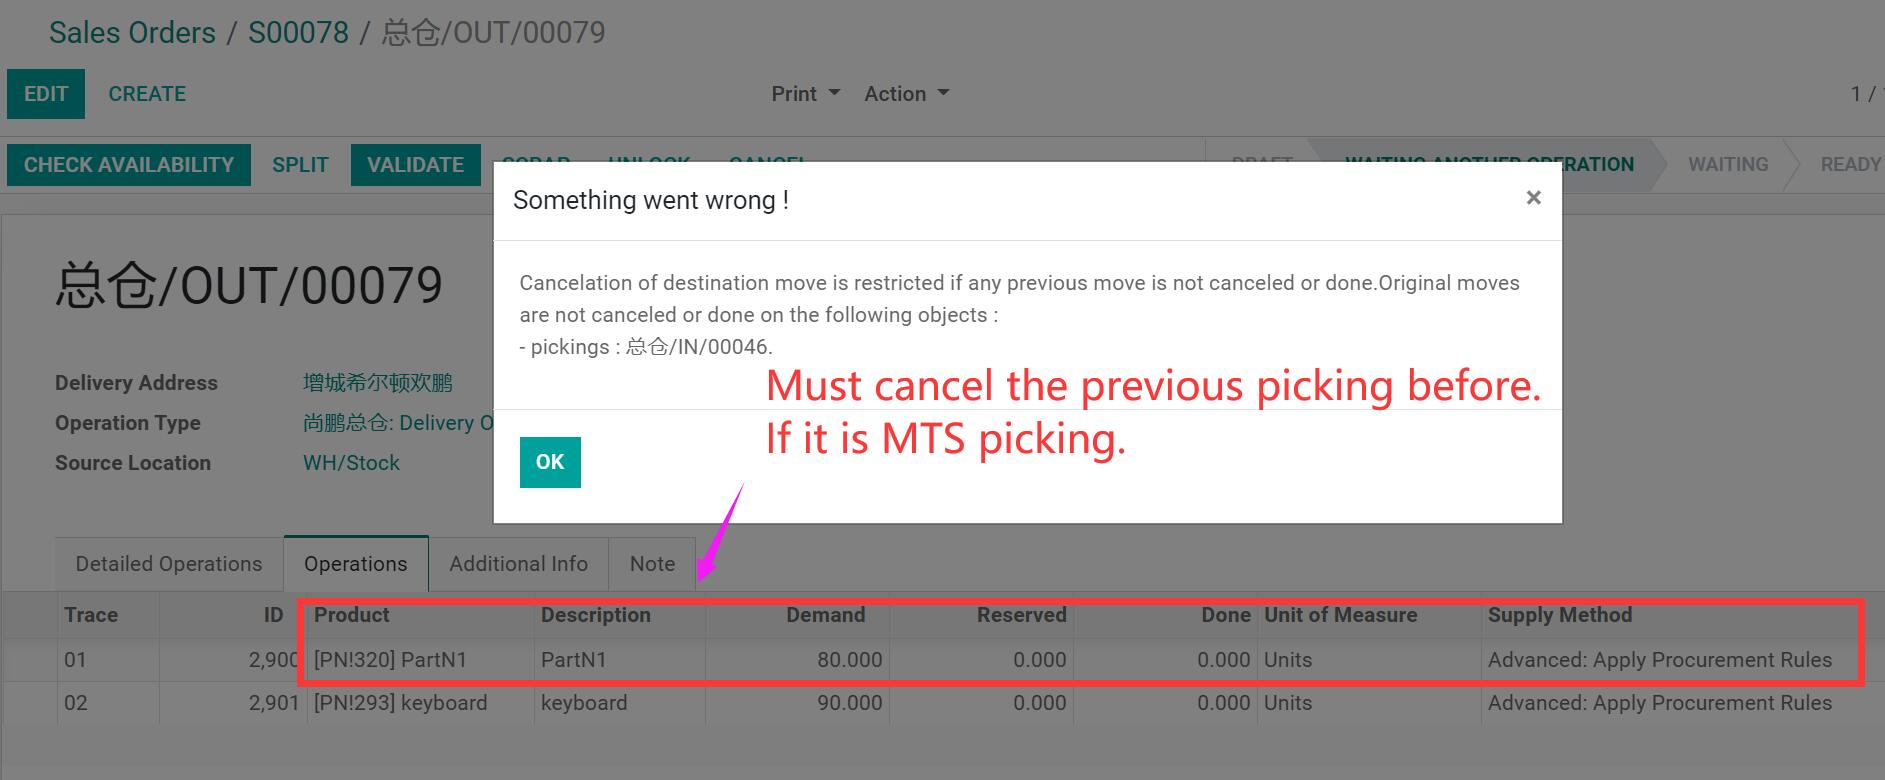 Stock Picking reset to draft, Restrict MTO Cancel 